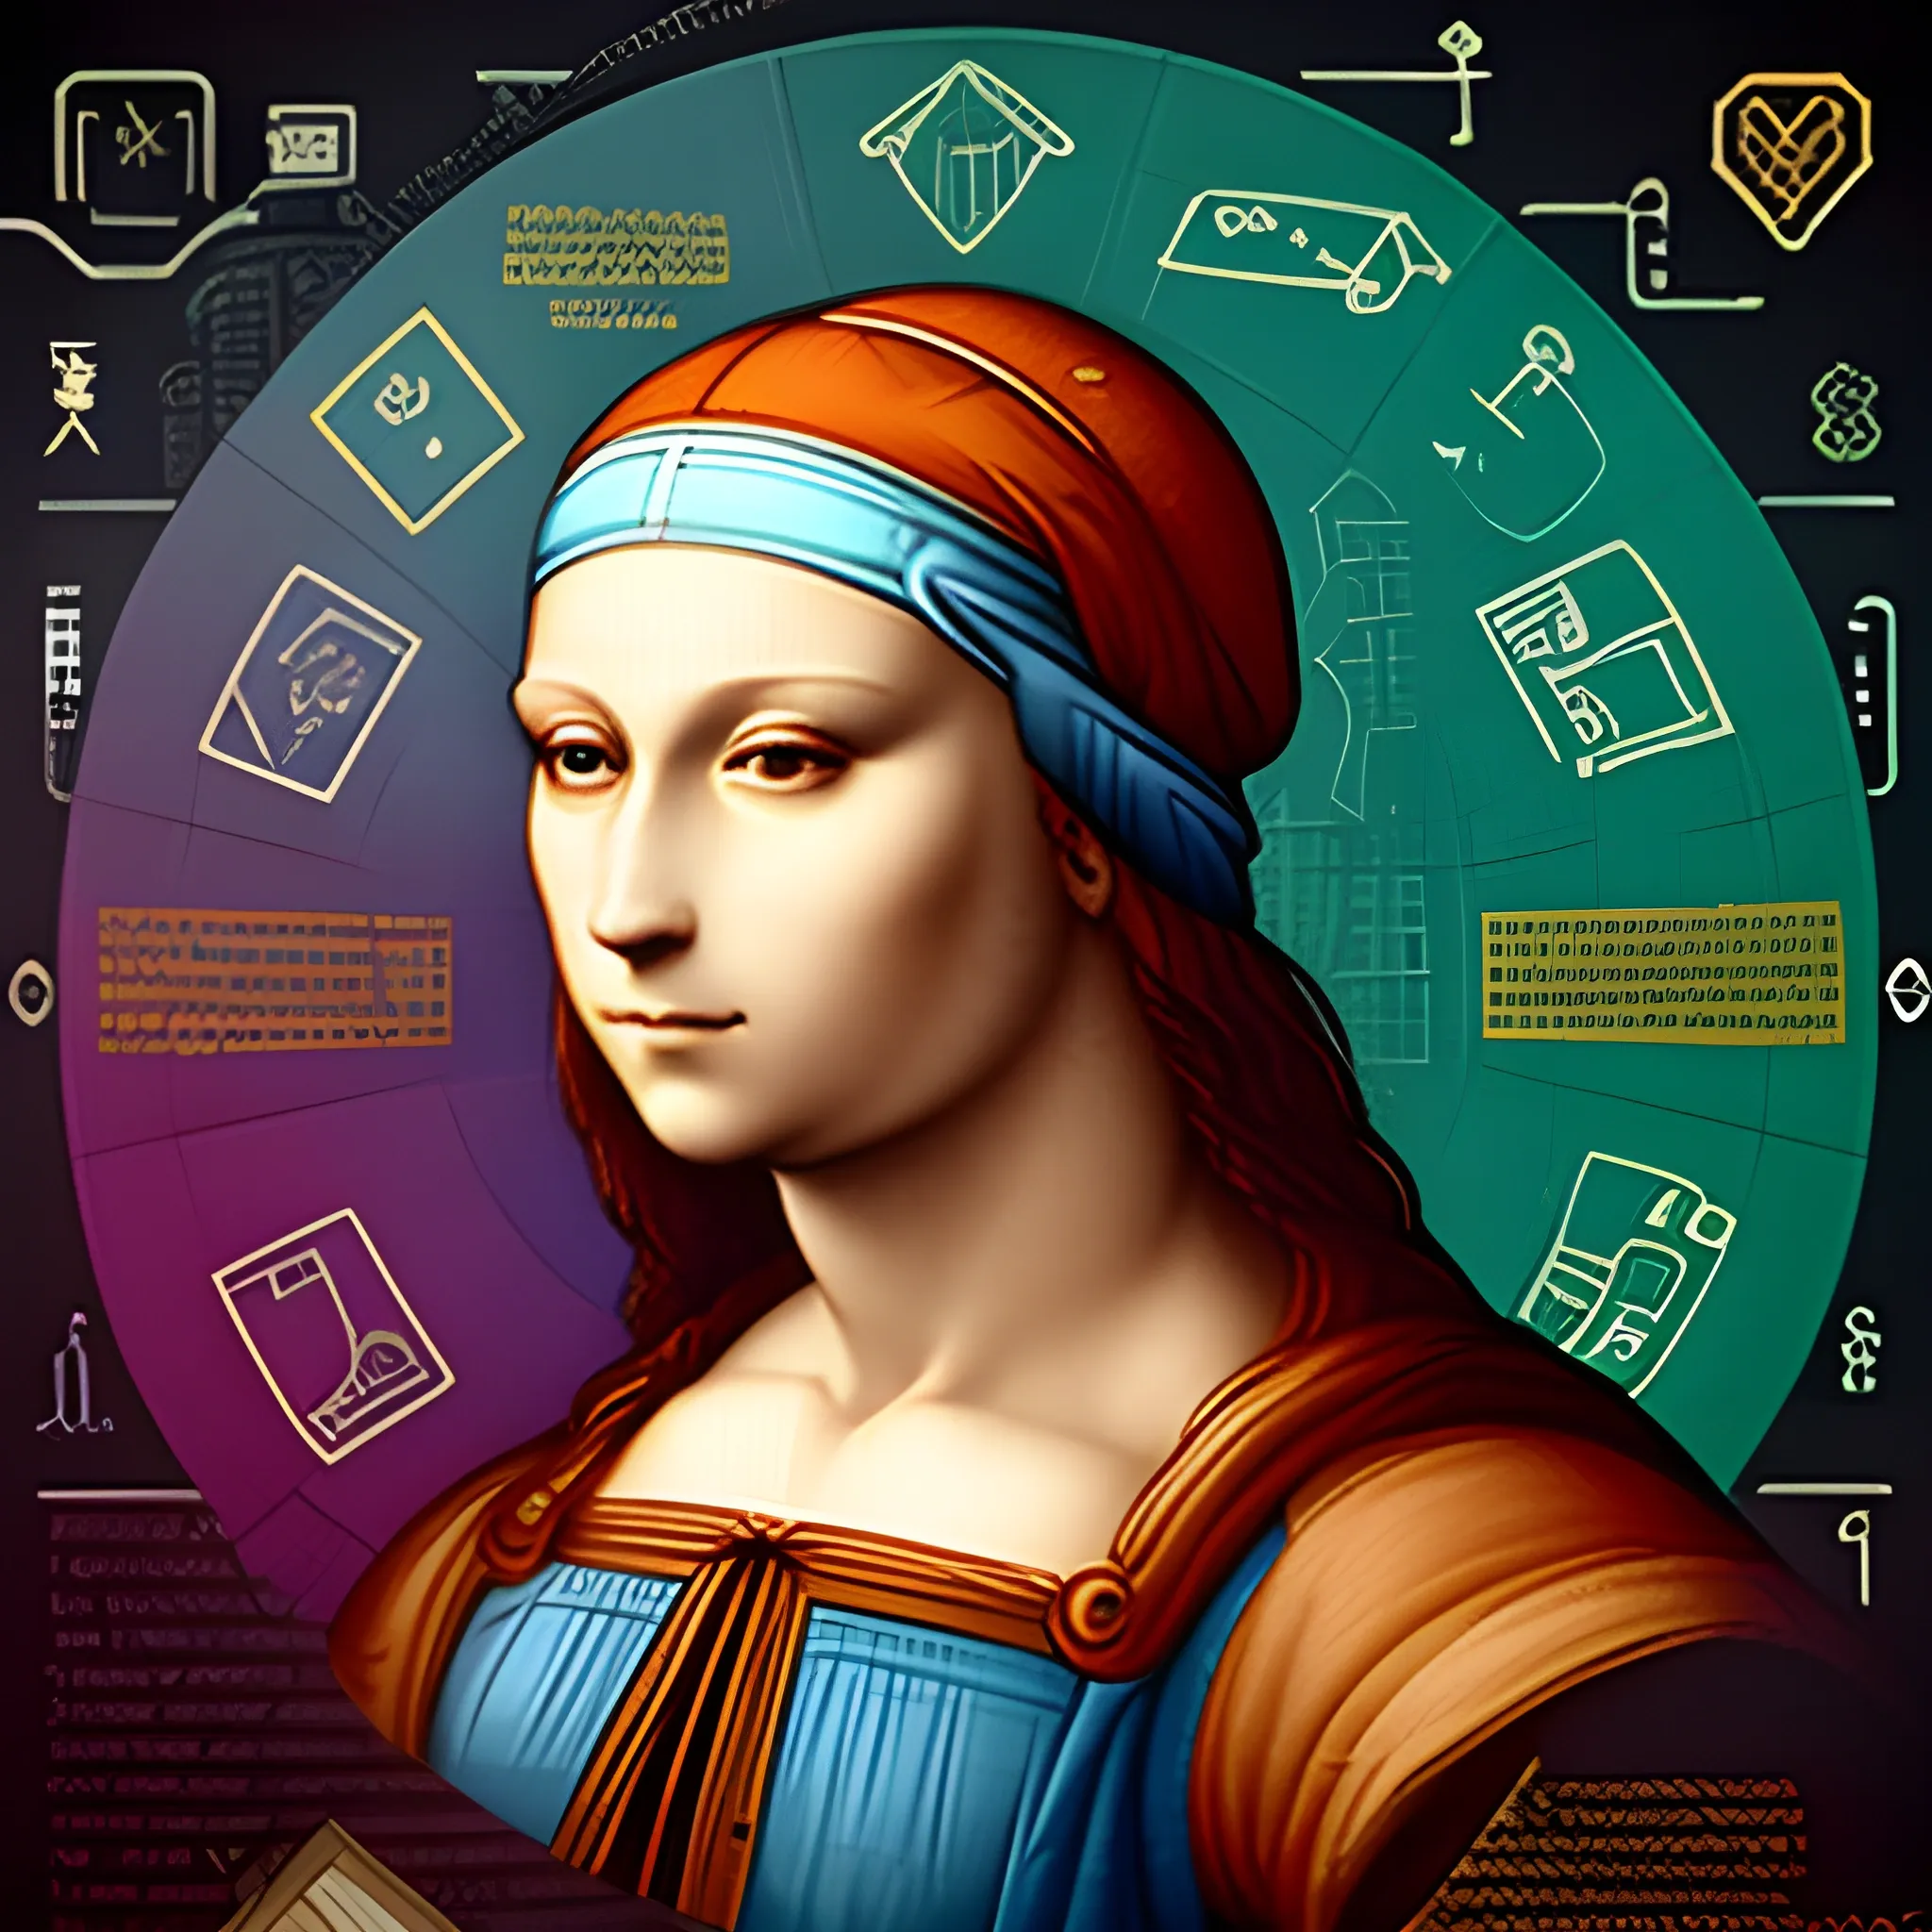 Generate a corporative, future, colorful, modern image, creative invention, related to digital products, Leonardo da Vinci as a millennial, do not use machines or txt and use really environment,Trippy